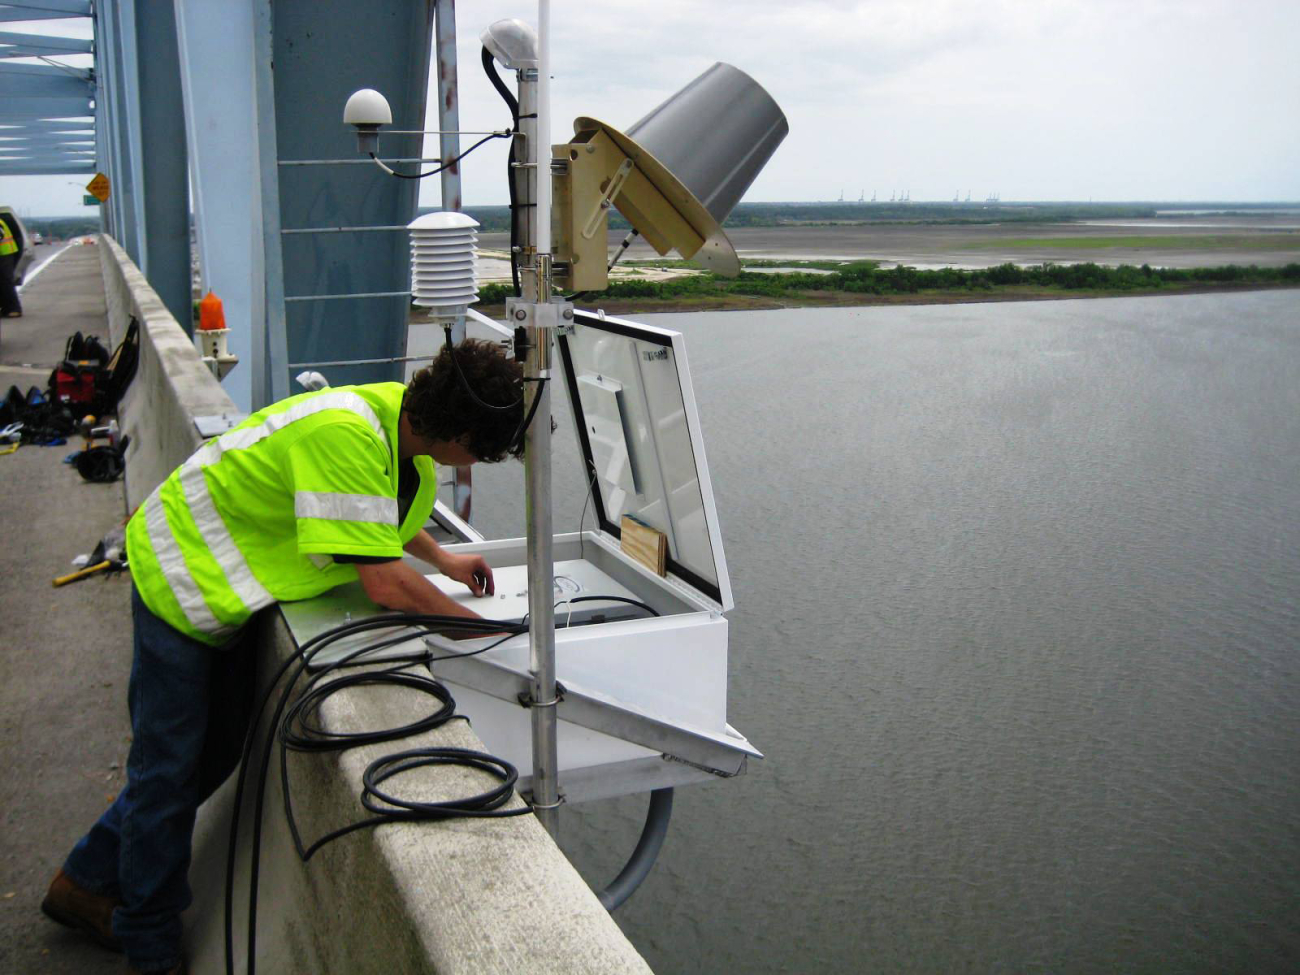 An employee of NOAA's Center for Operational Oceanographic Products (CO-OPS)installs an air gap sensor on the Don Holt Bridge